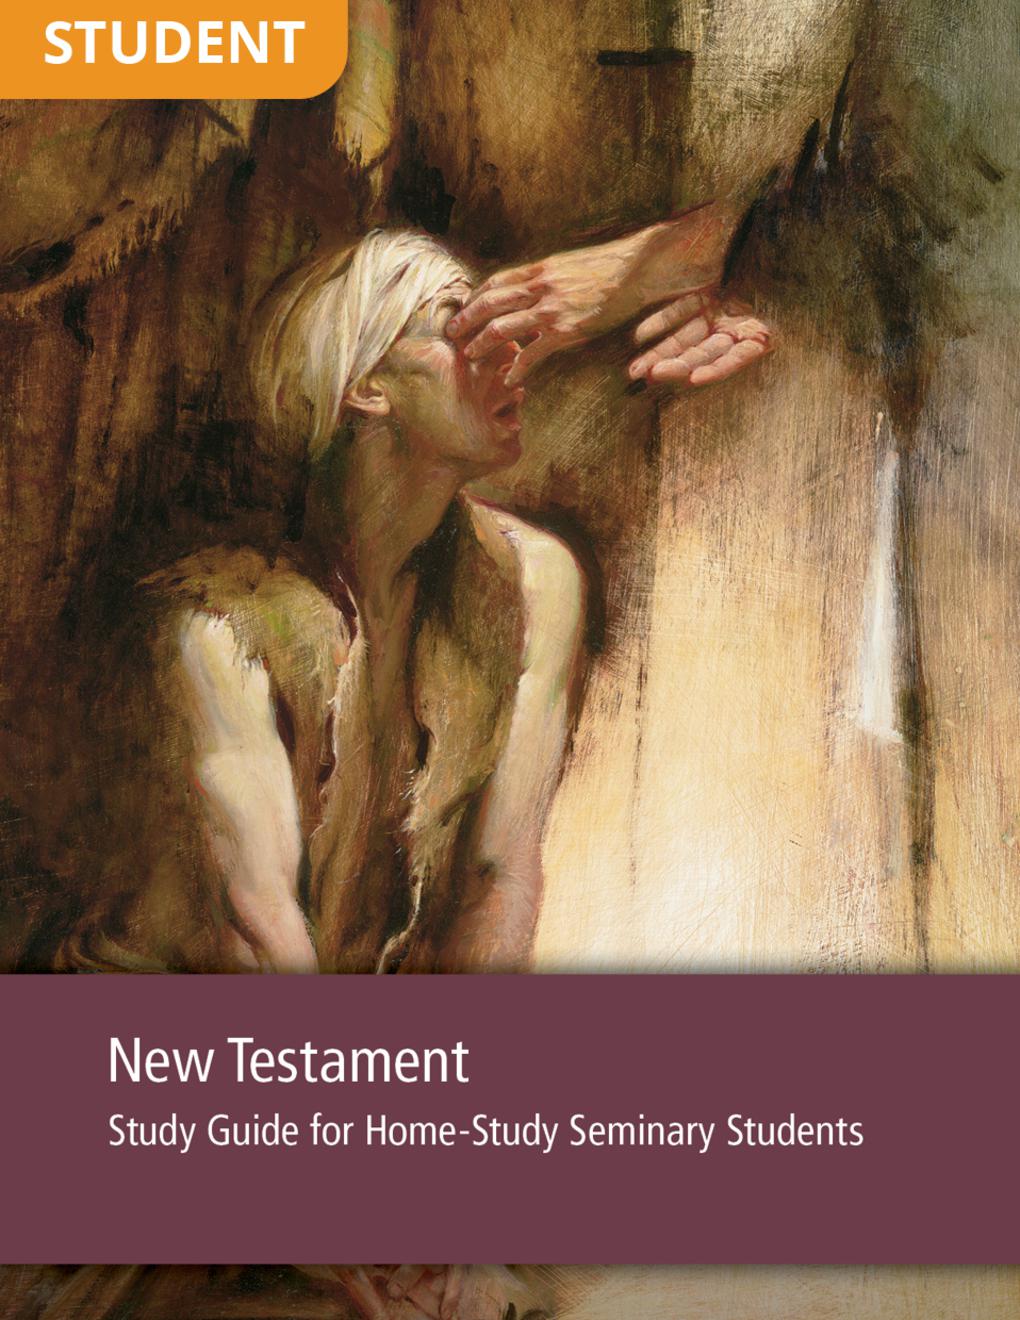 New Testament Study Guide for Home-Study Seminary Seminary Students